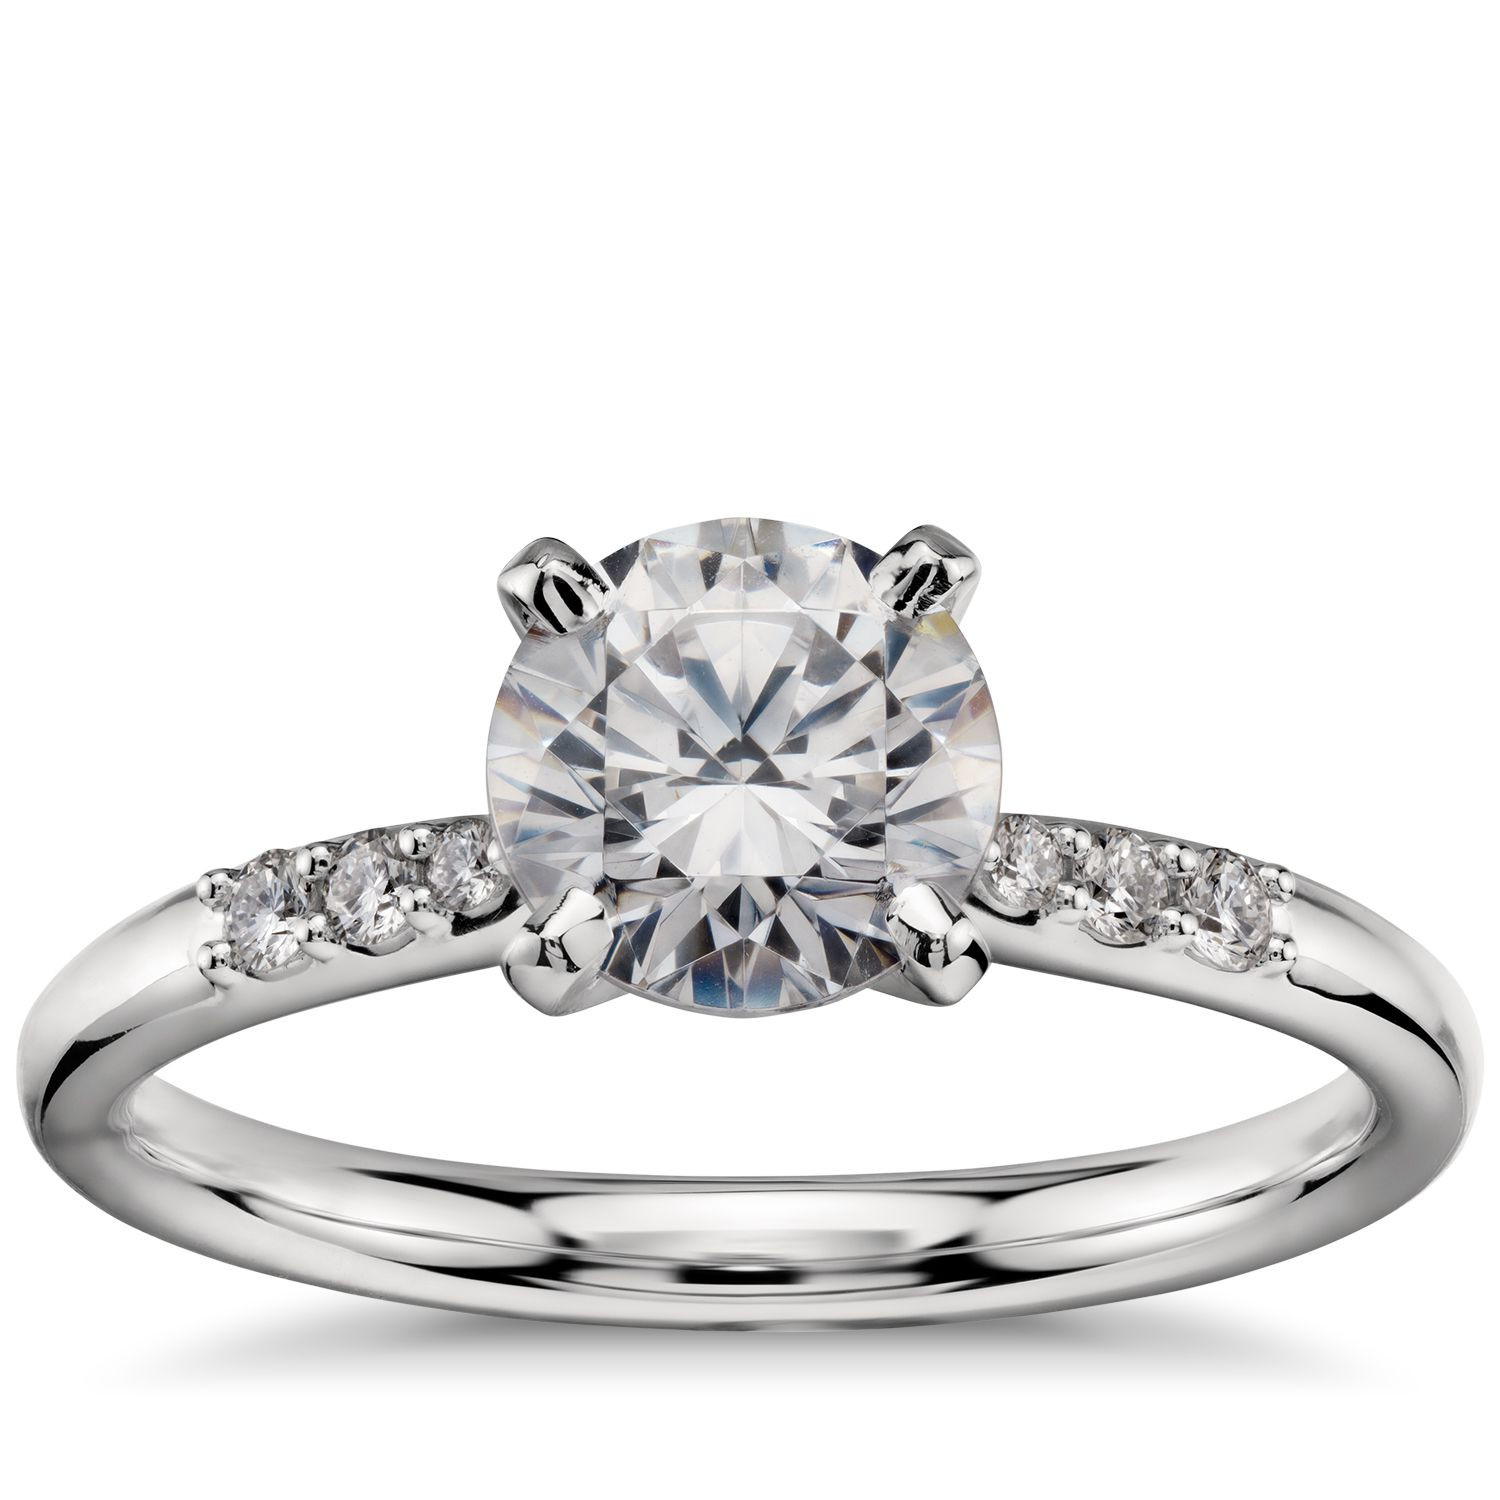 Pictures Of Diamond Engagement Rings
 10 Engagement Rings That Will Make You Say Yes Rustic